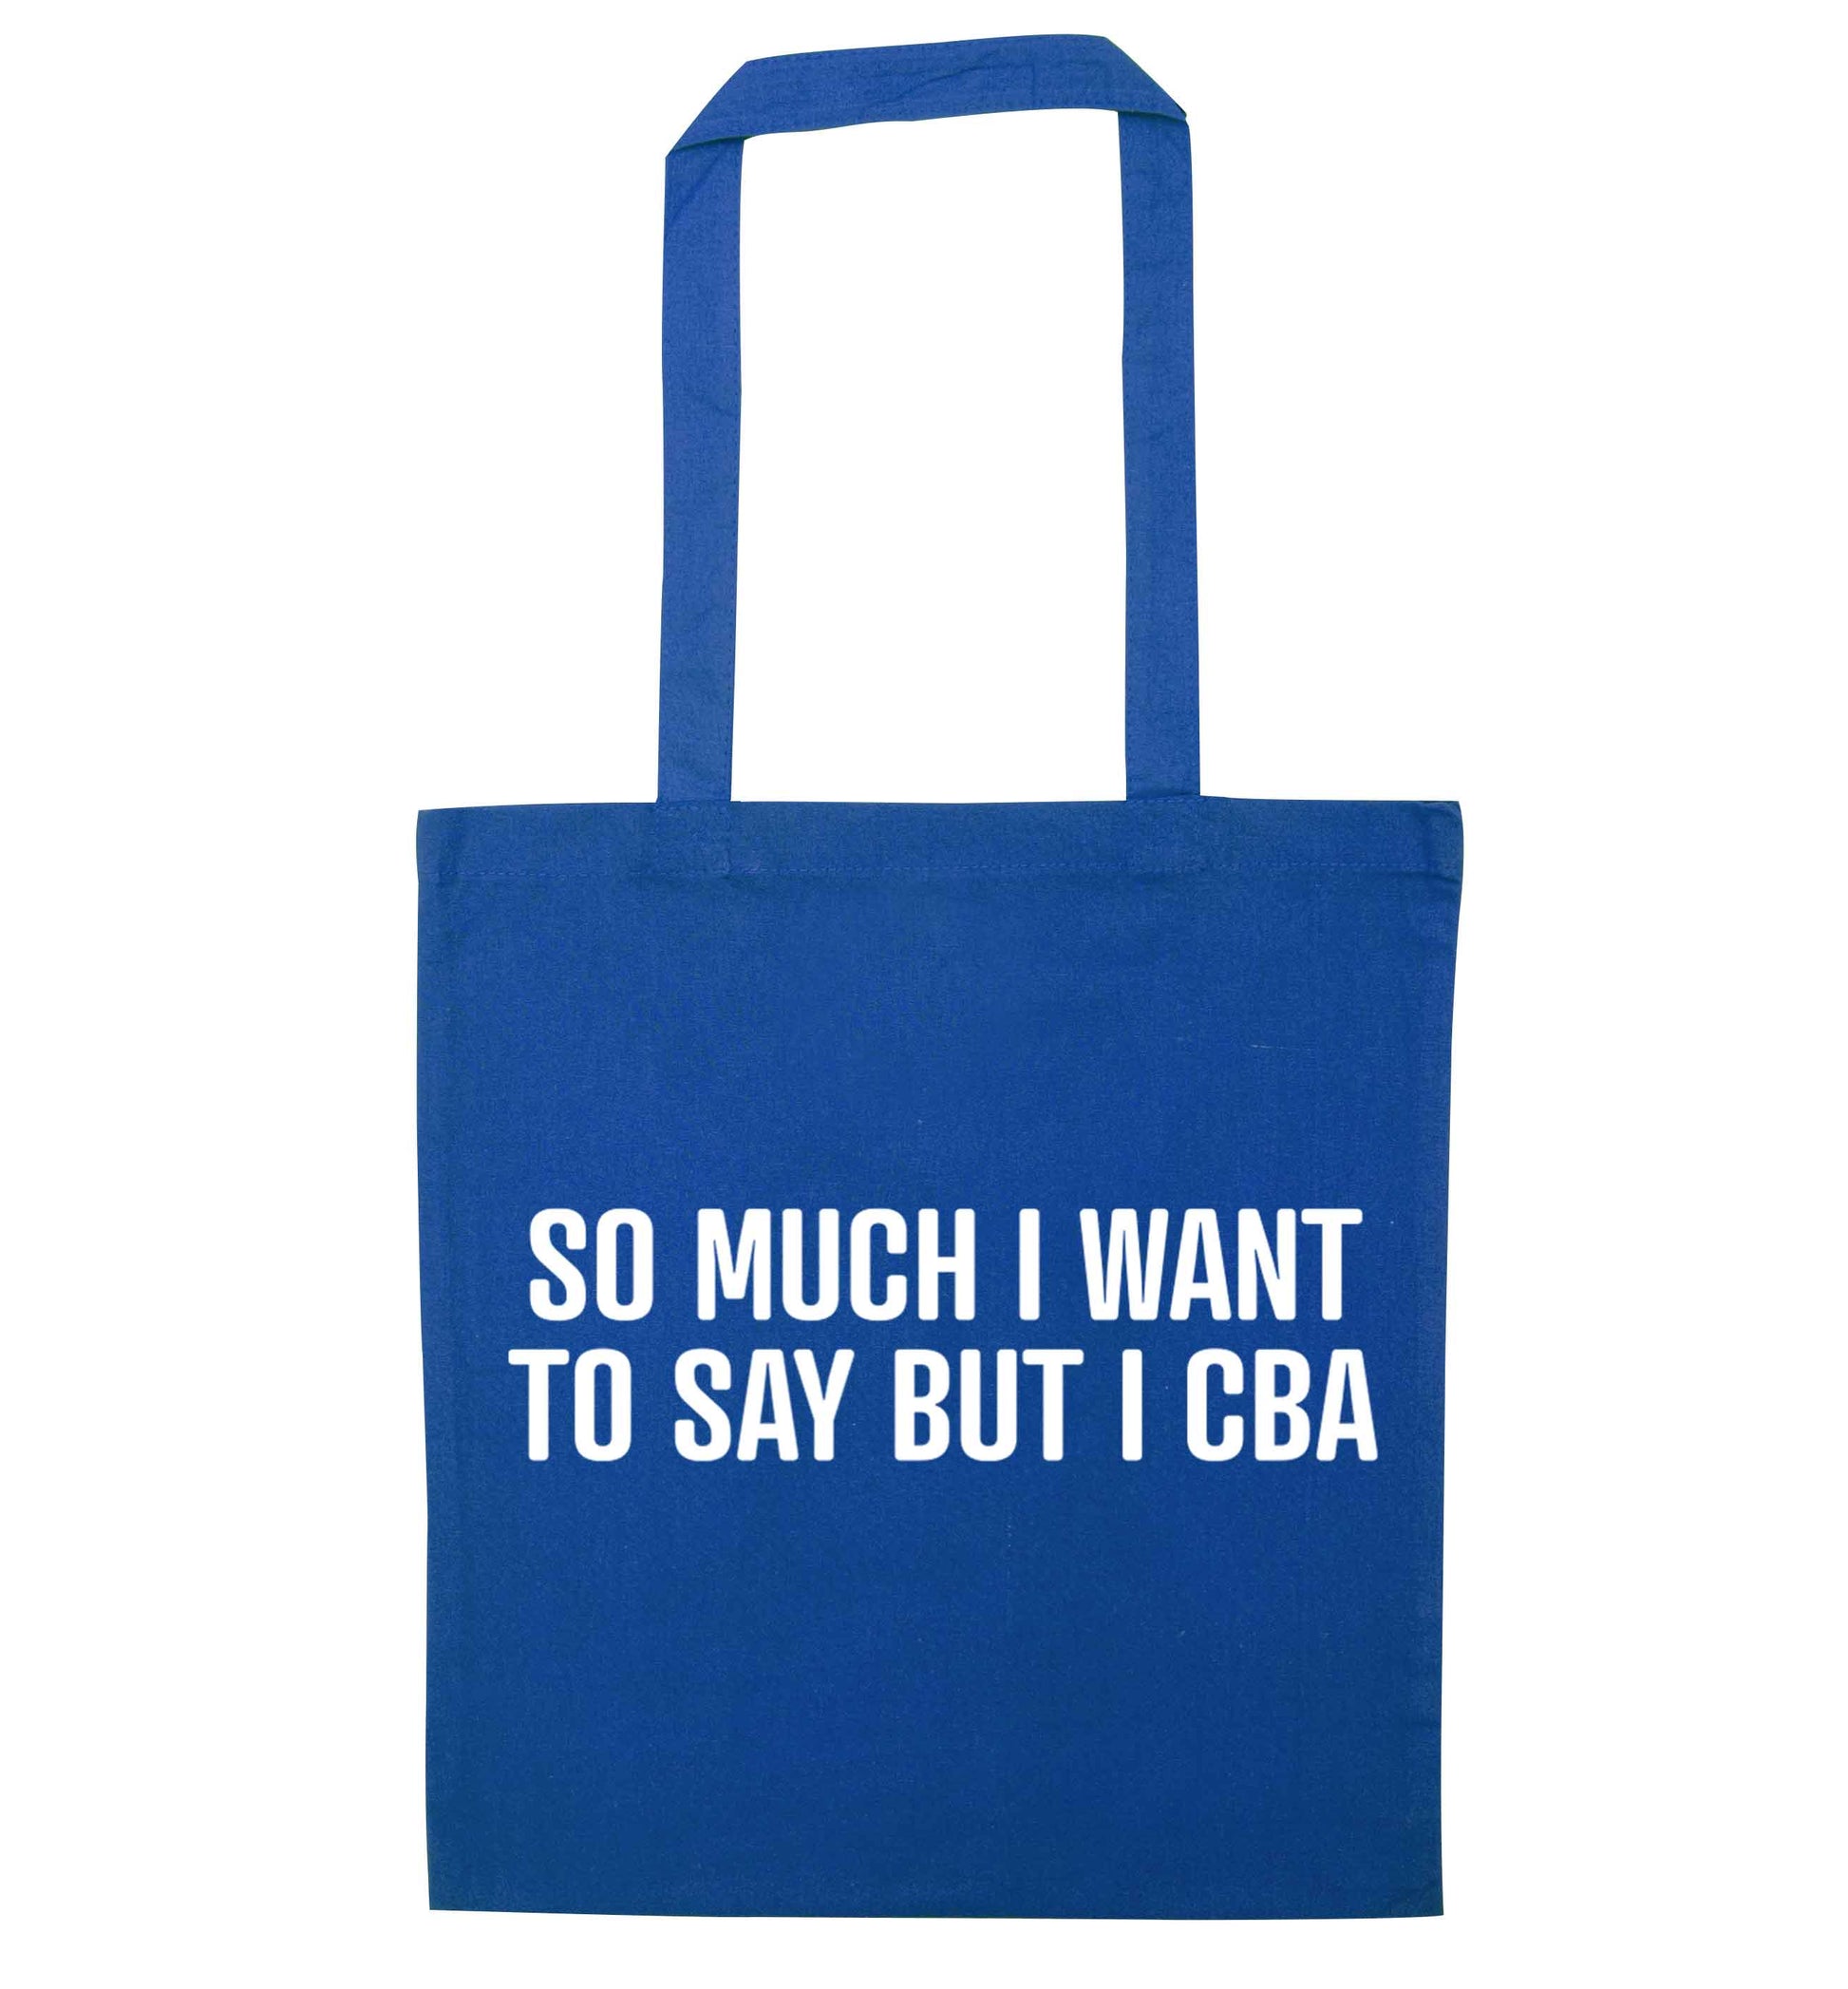 So much I want to say I cba  blue tote bag